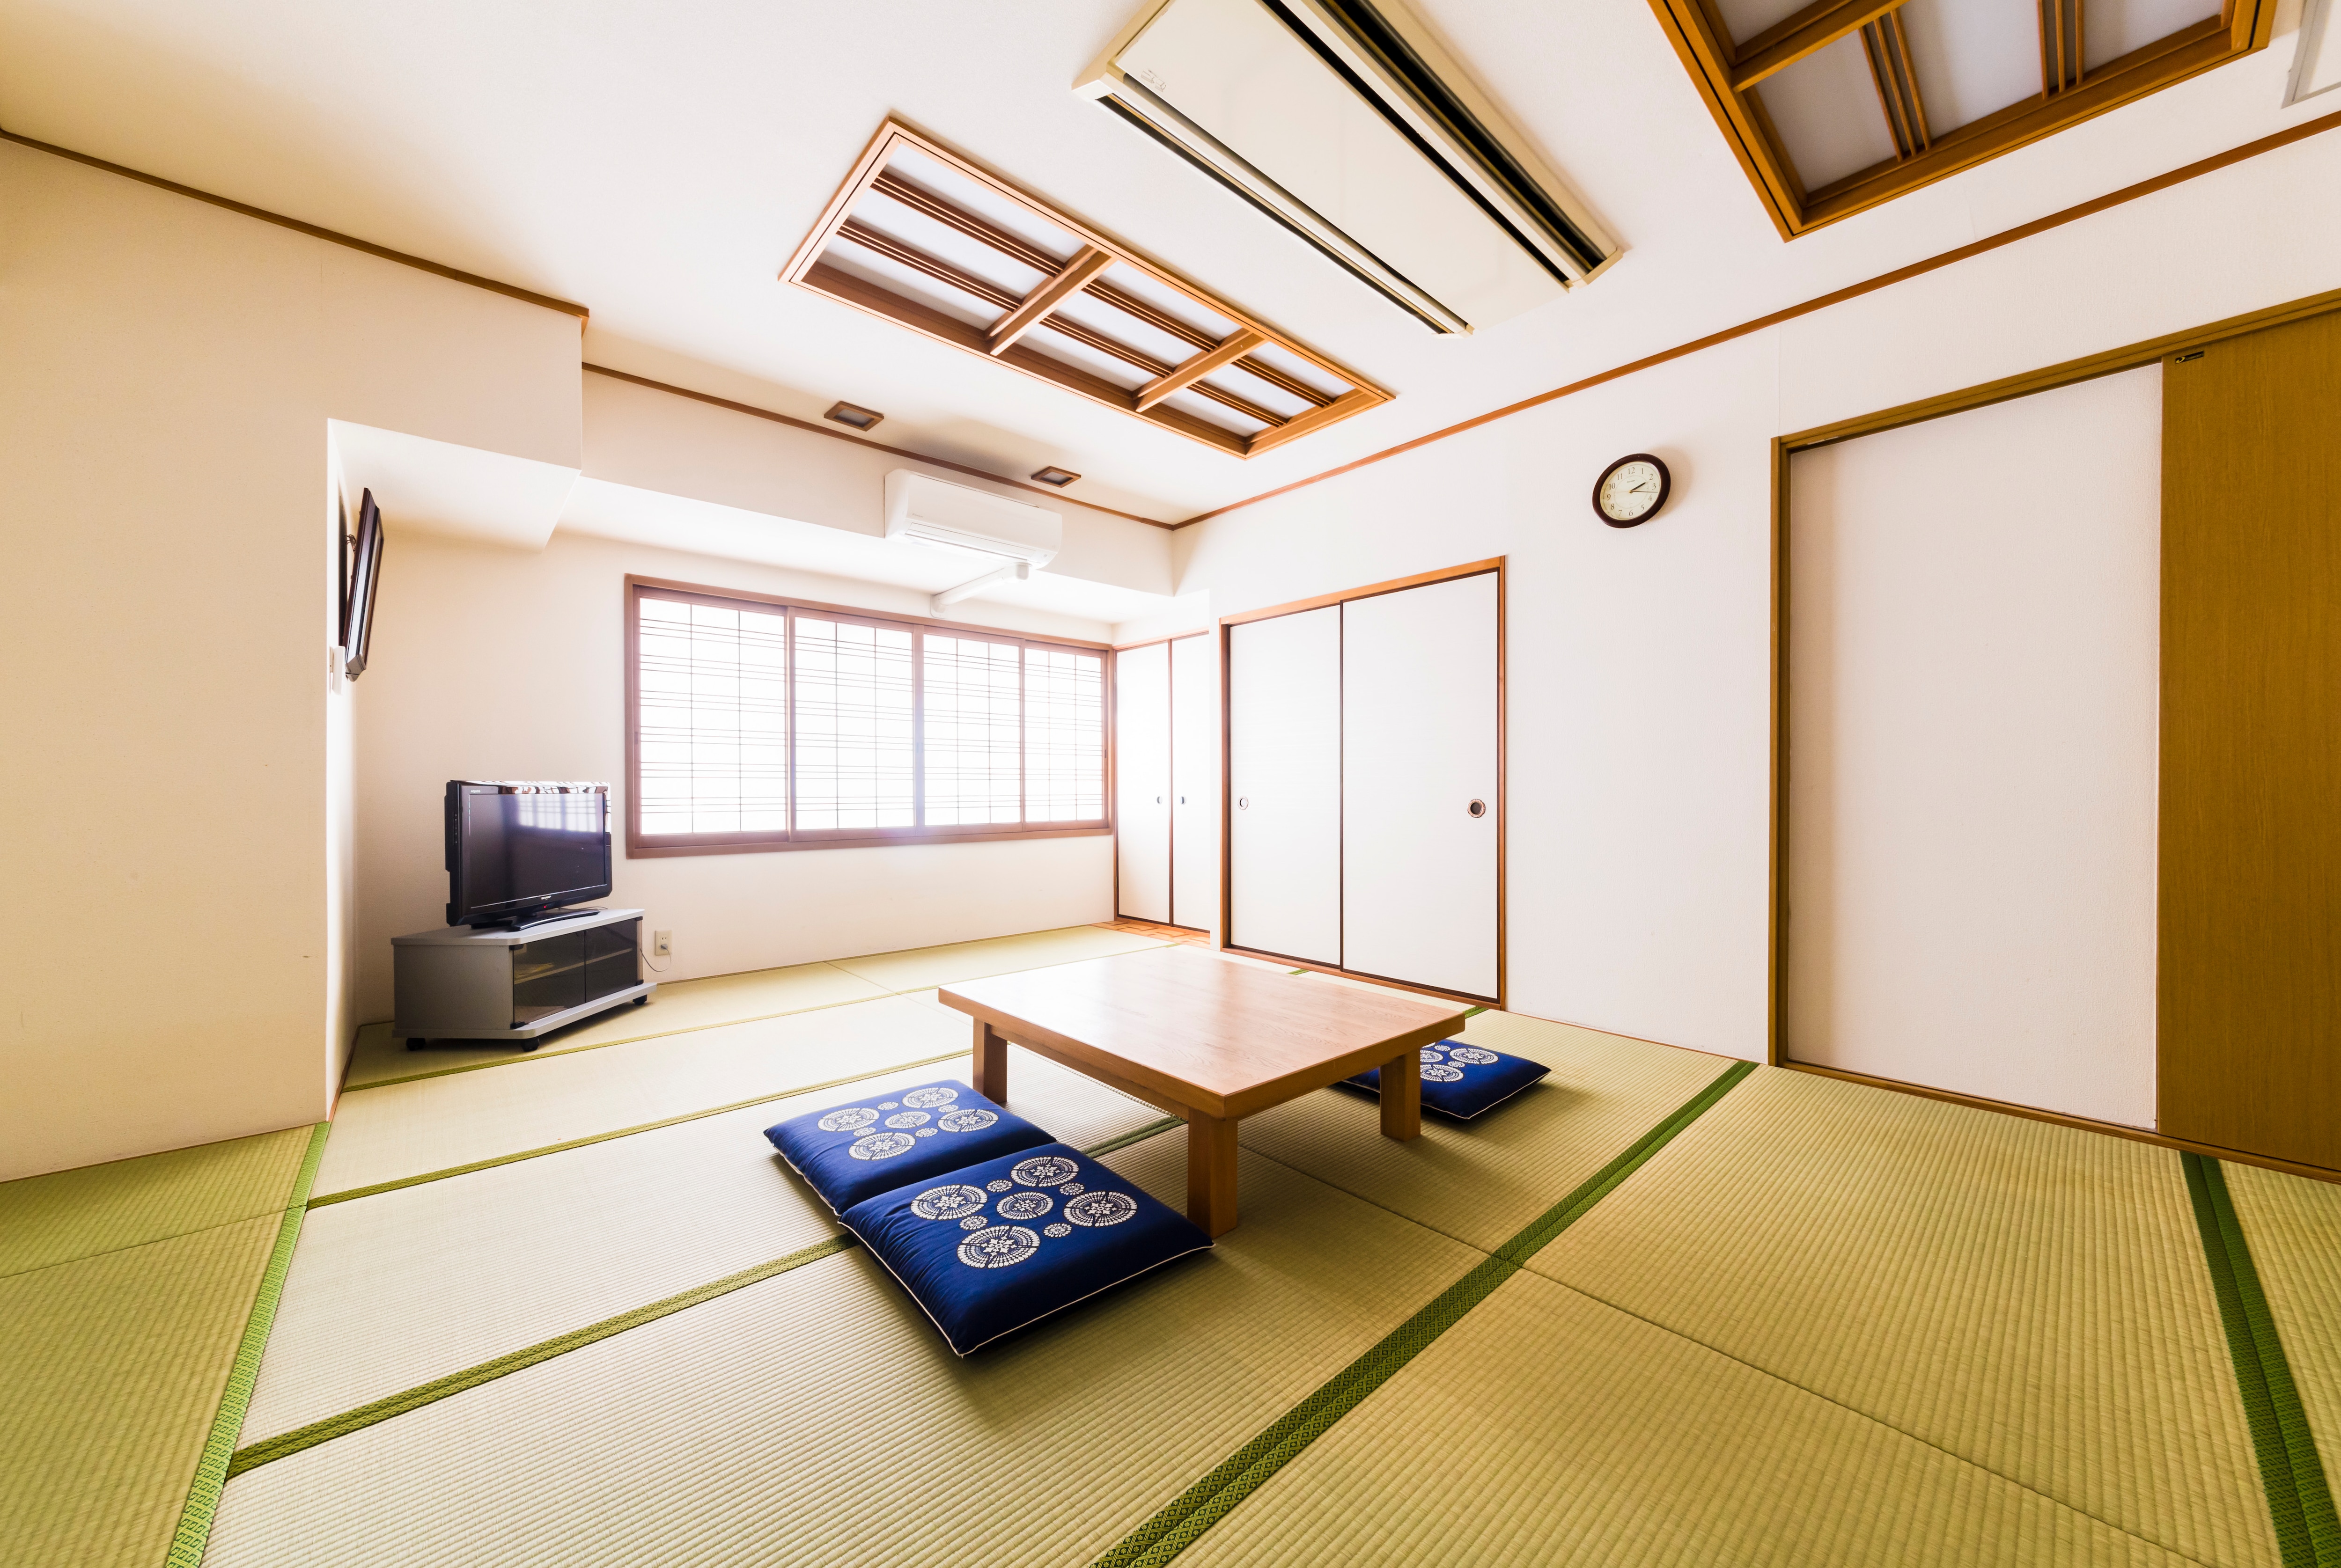 Japanese-style room 14 tatami mats that can accommodate 2 to 7 people. You can relax in a spacious and spacious room.